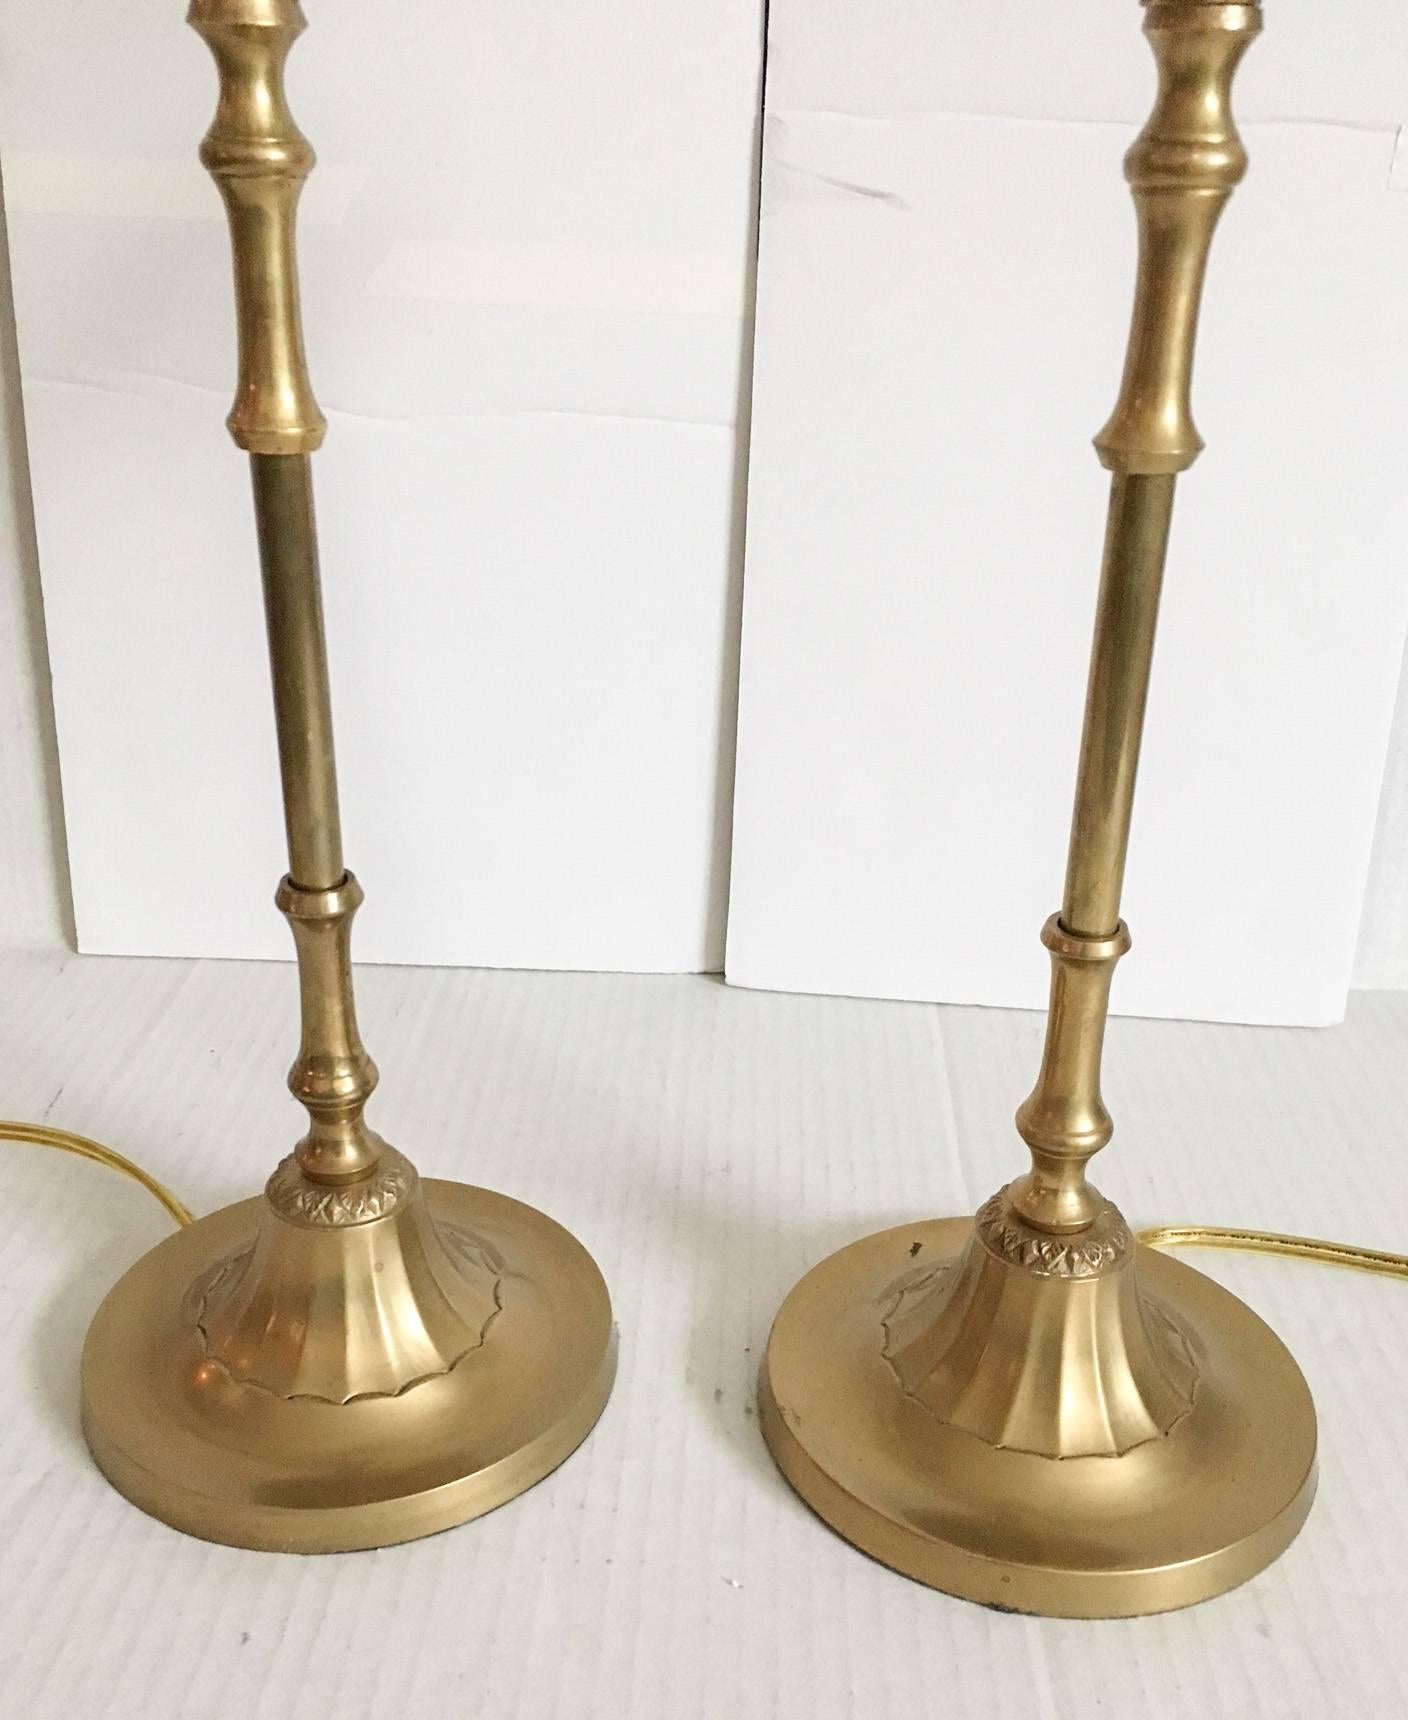 Beyond fabulous pair of solid brass candlestick buffet lamps with faux-bamboo form stems and a graceful palm tree topper. Each lamp has the original wiring and is in excellent vintage condition with light age patina. Dimensions for each lamp,